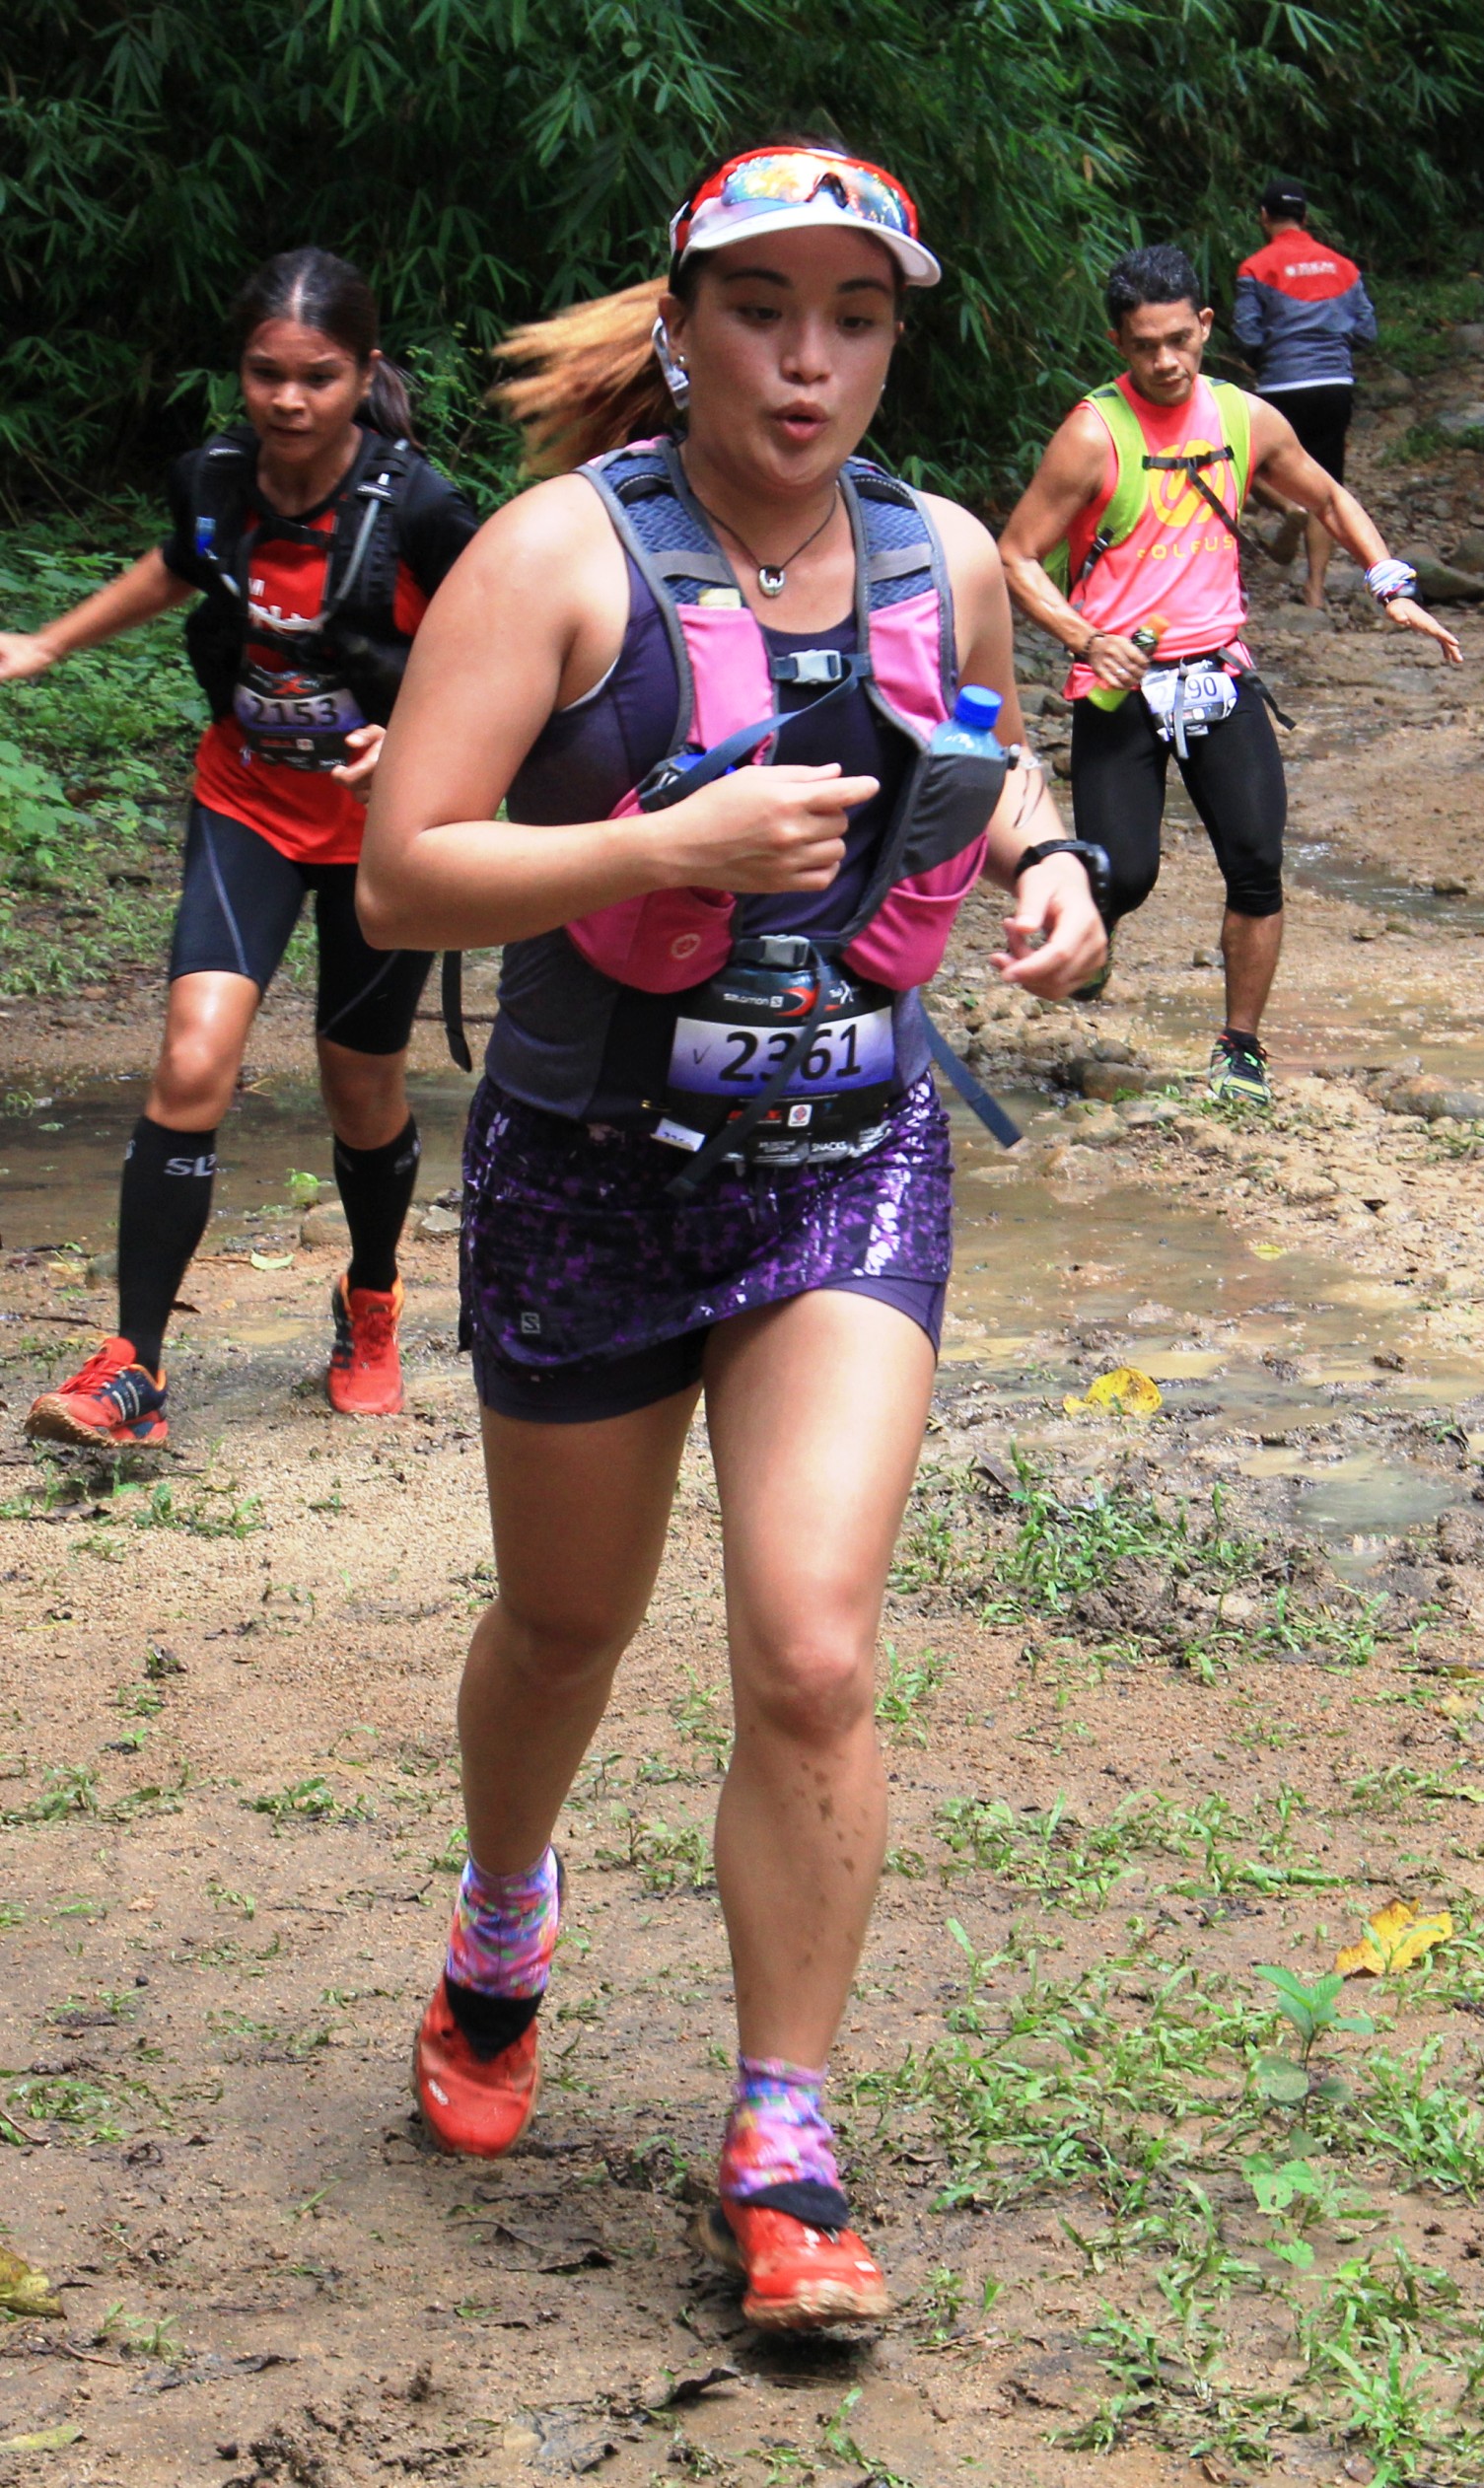 Salomon Xtrail participants rough it out in previous Subic editions of the trail run.